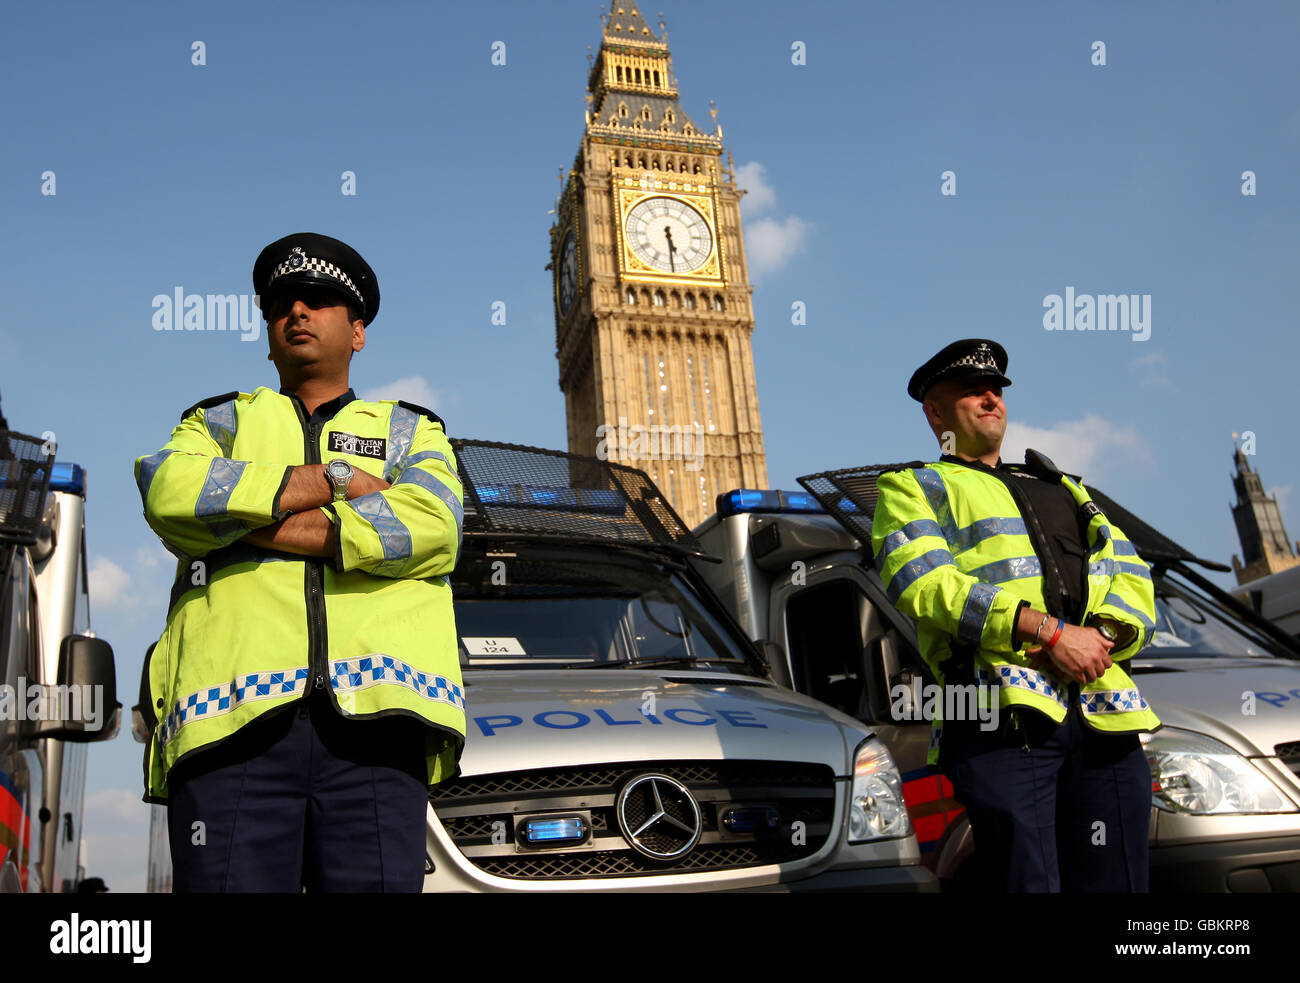 Metropolitan Police officers with police vans stand infront of Big Ben, as they monitor a demonstration in Parliament Square, Westminster, London, calling for a ceasefire in Sri Lanka. PRESS ASSOCIATION photo. Picture Date: Monday April 20th, 2009. Photo credit should read: Dominic Lipinski/PA Wire Stock Photo